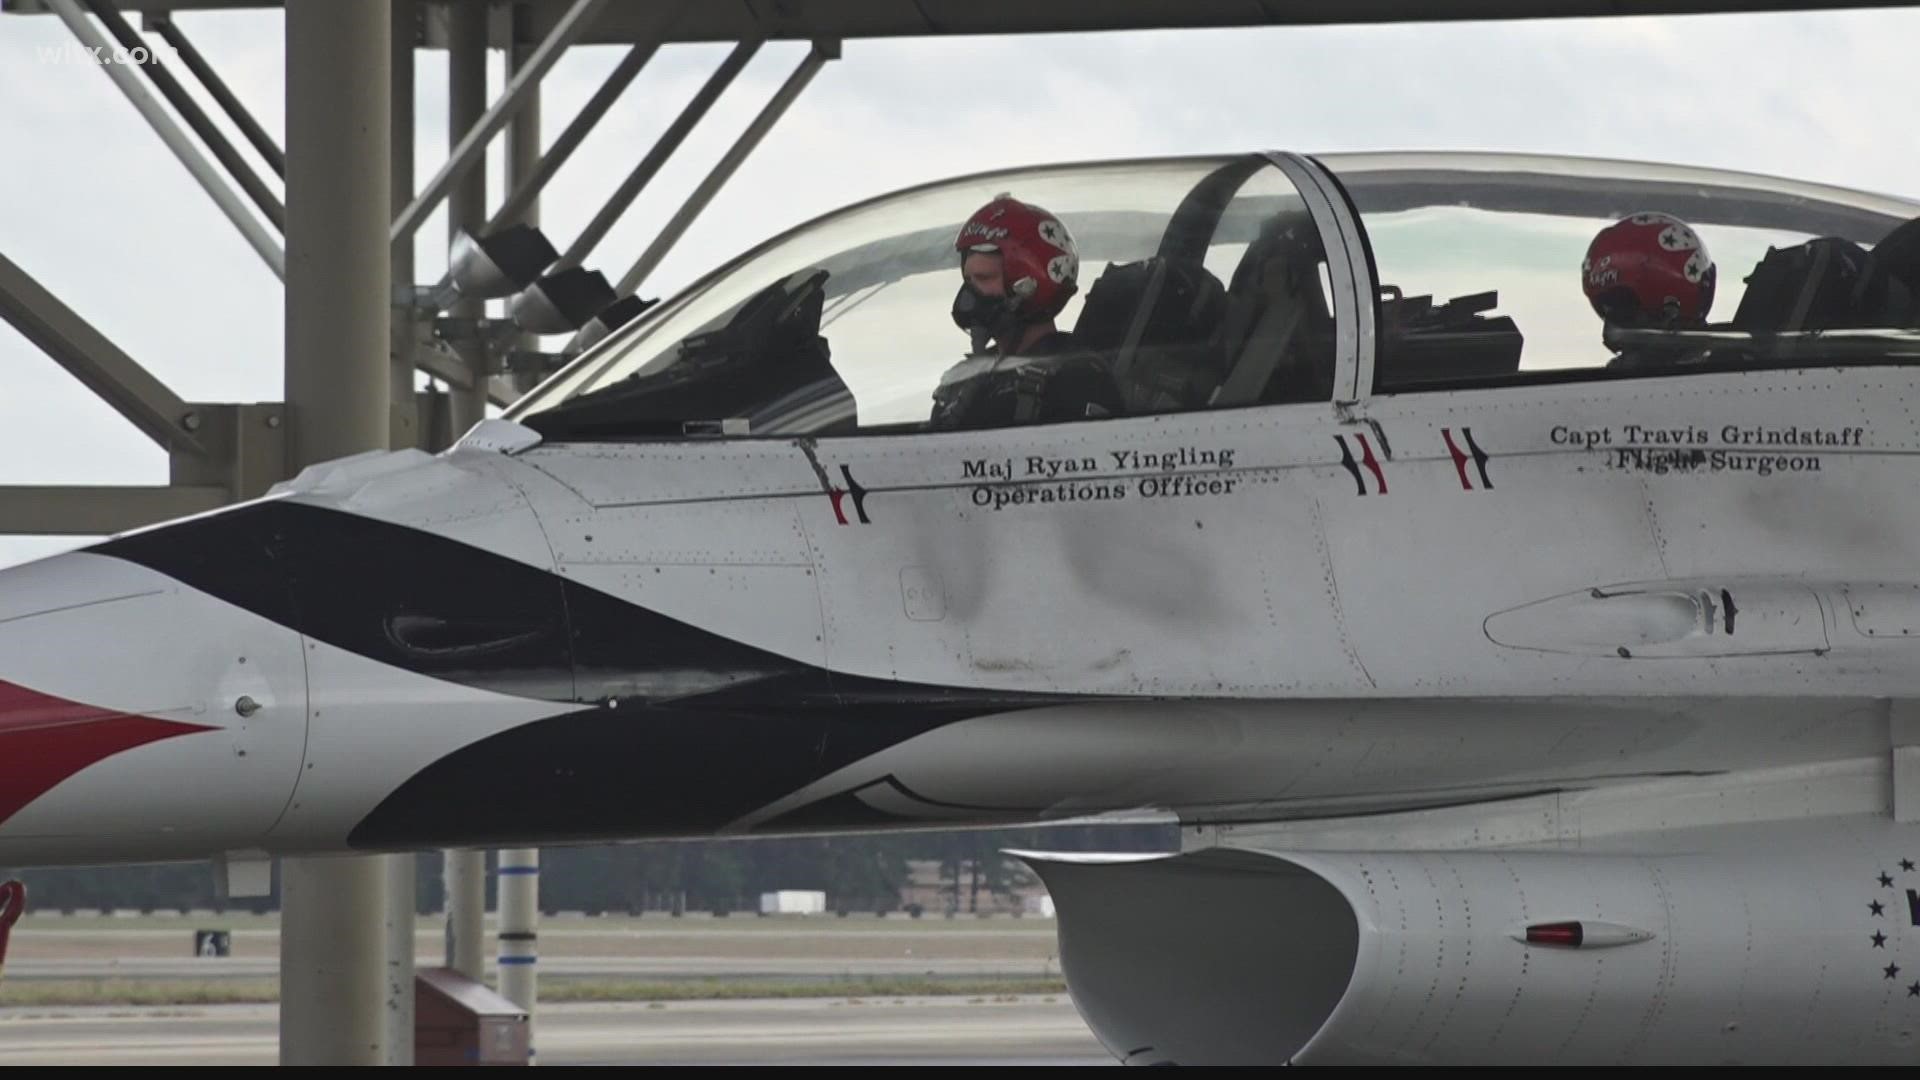 The Thunderbirds are in town this weekend for the Sumter Air Expo.